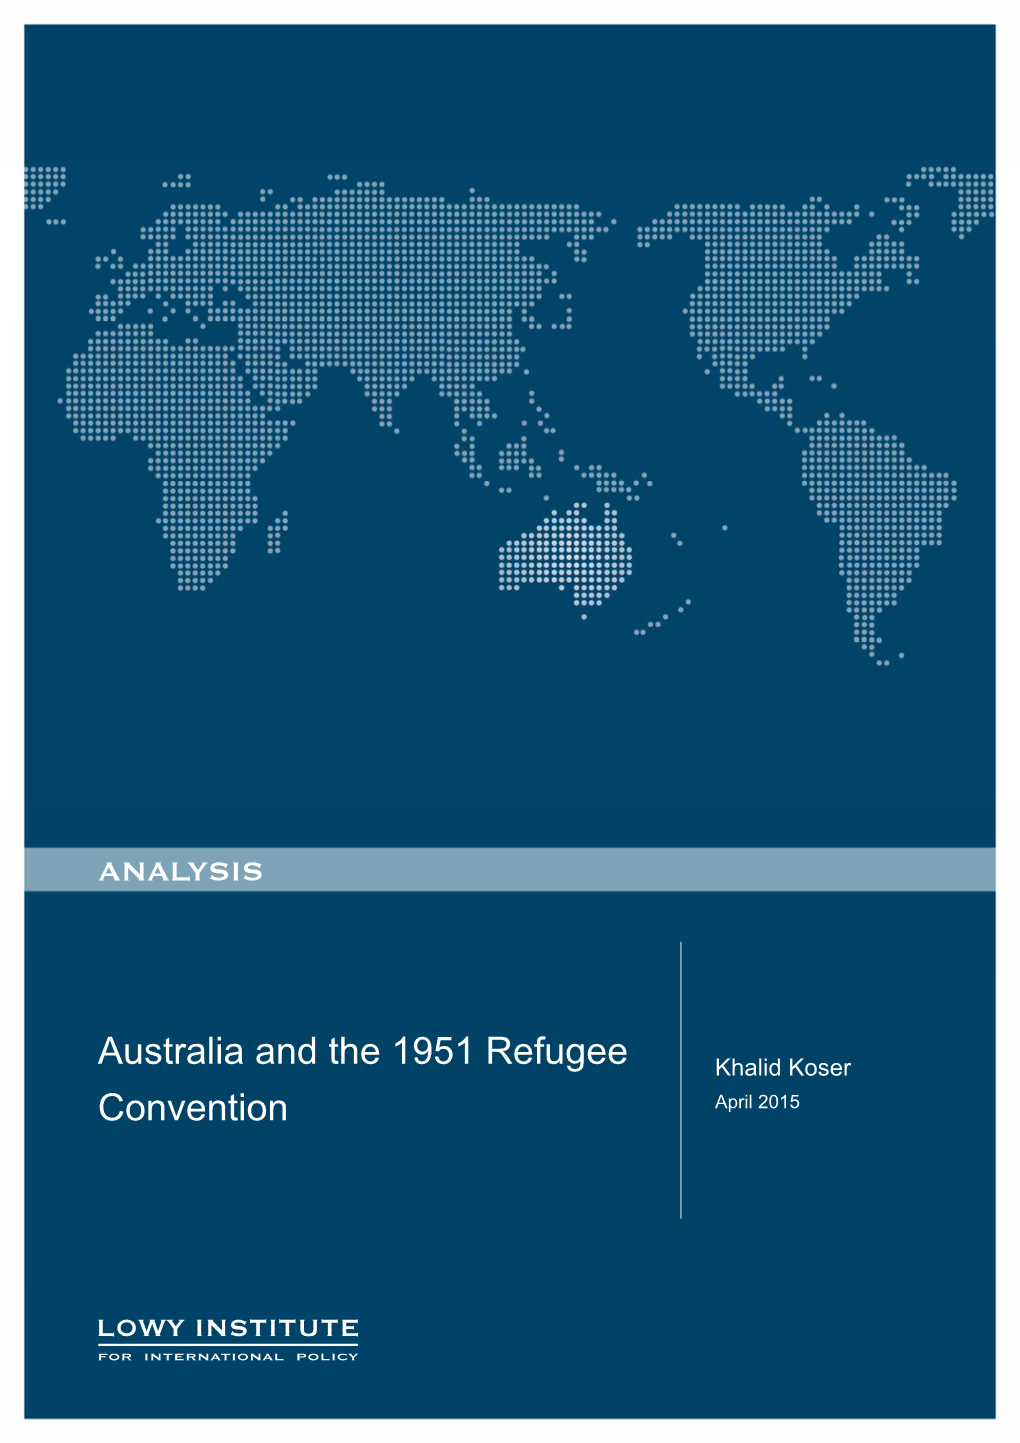 Australia and the 1951 Refugee Convention